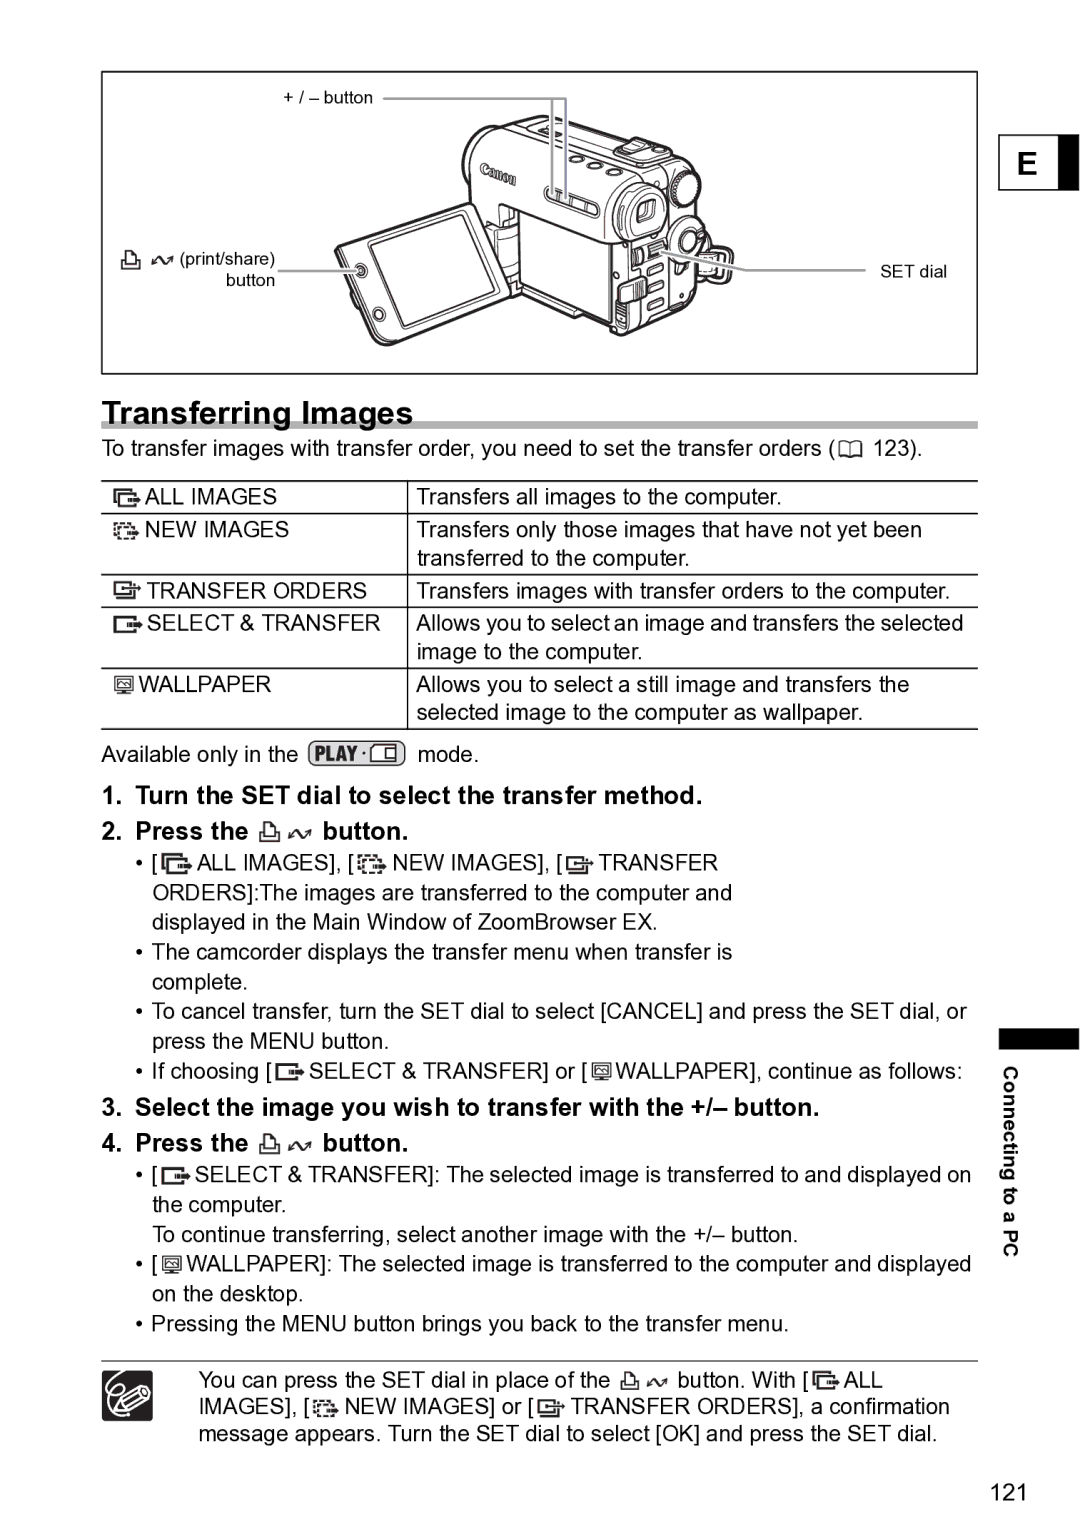 Canon S1 instruction manual Transferring Images, Wallpaper 